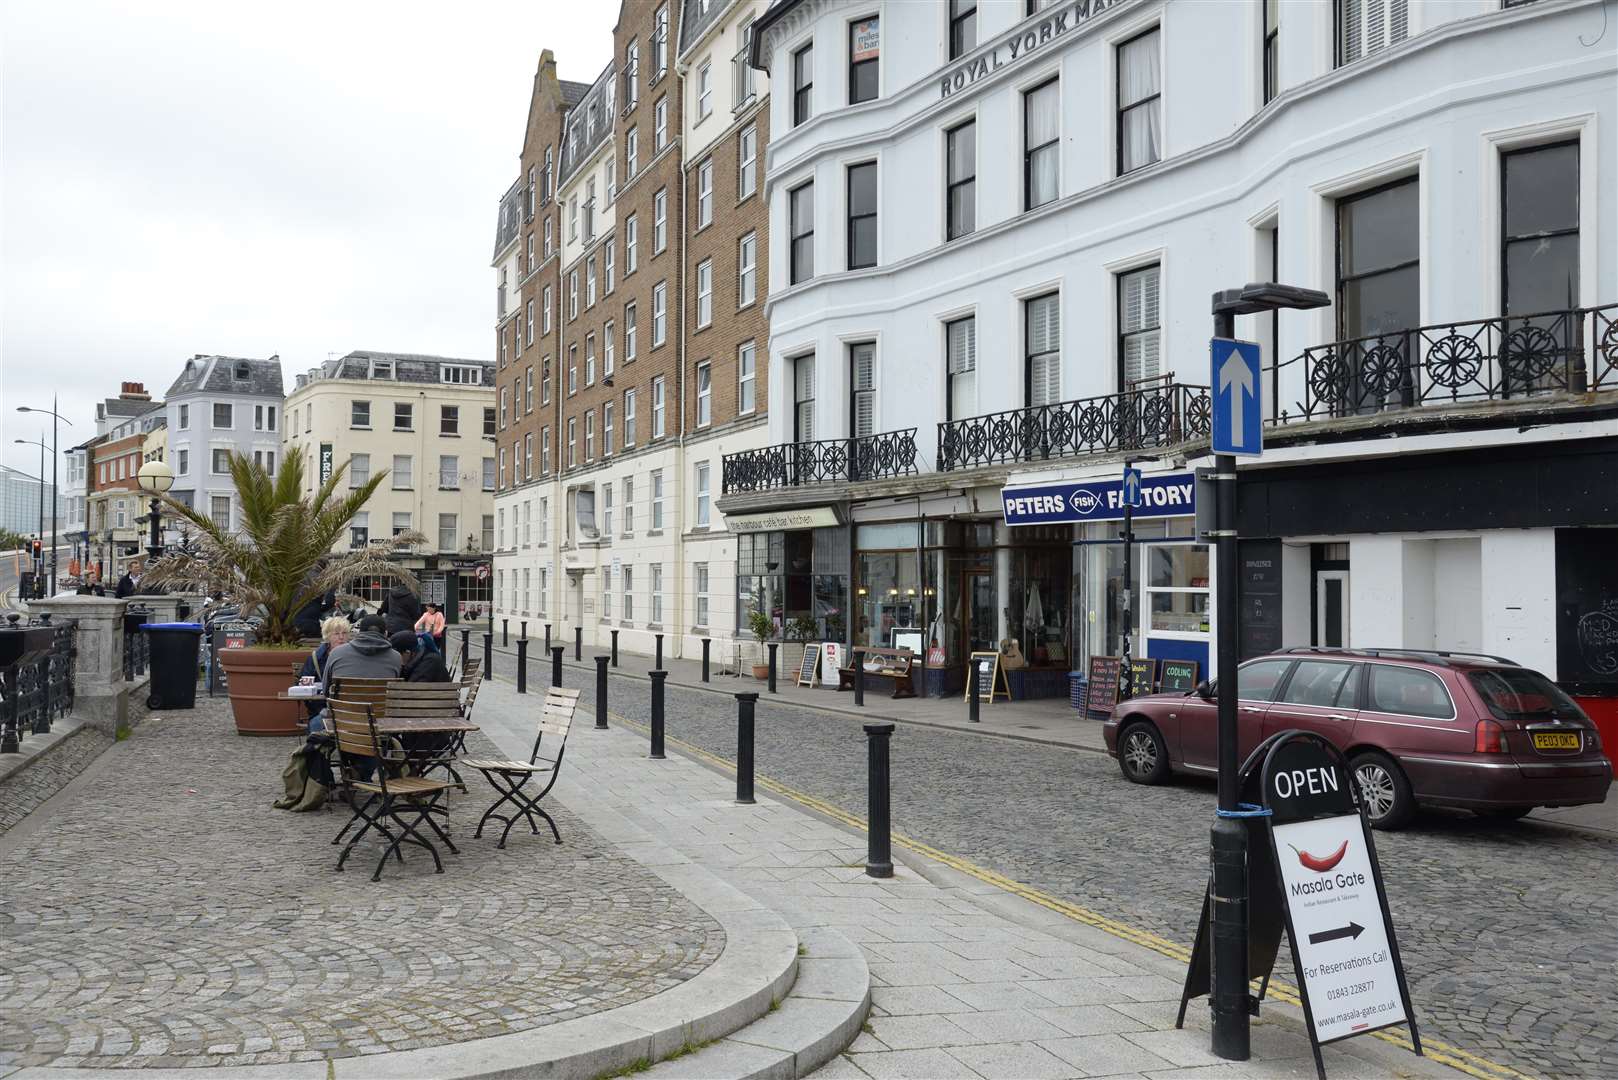 The Old Town area of Margate is a popular Airbnb destination. Picture: Chris Davey